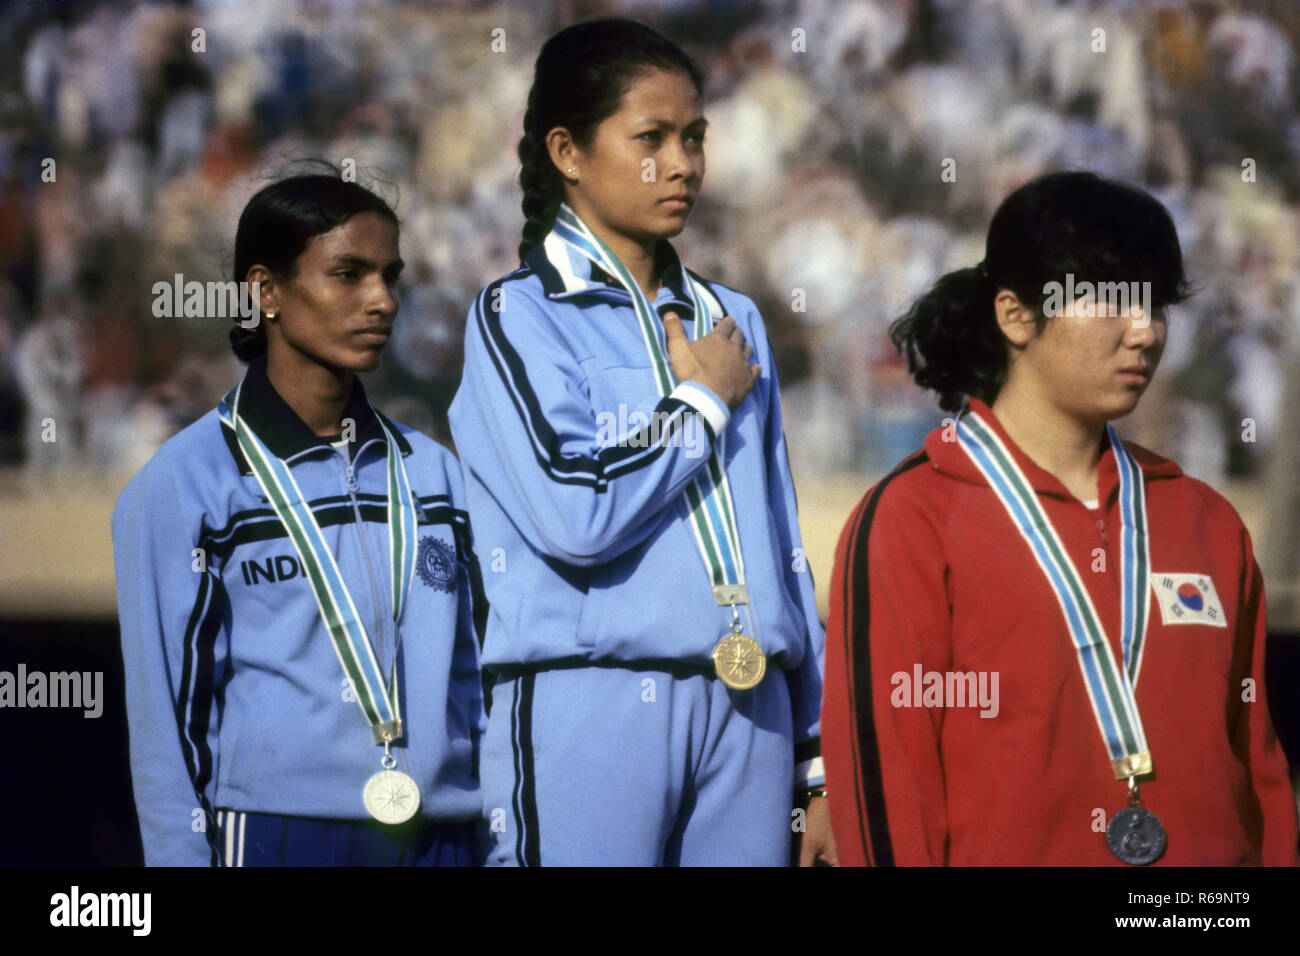 P. T. Usha second in running, prize distribution ceremony, India Stock Photo